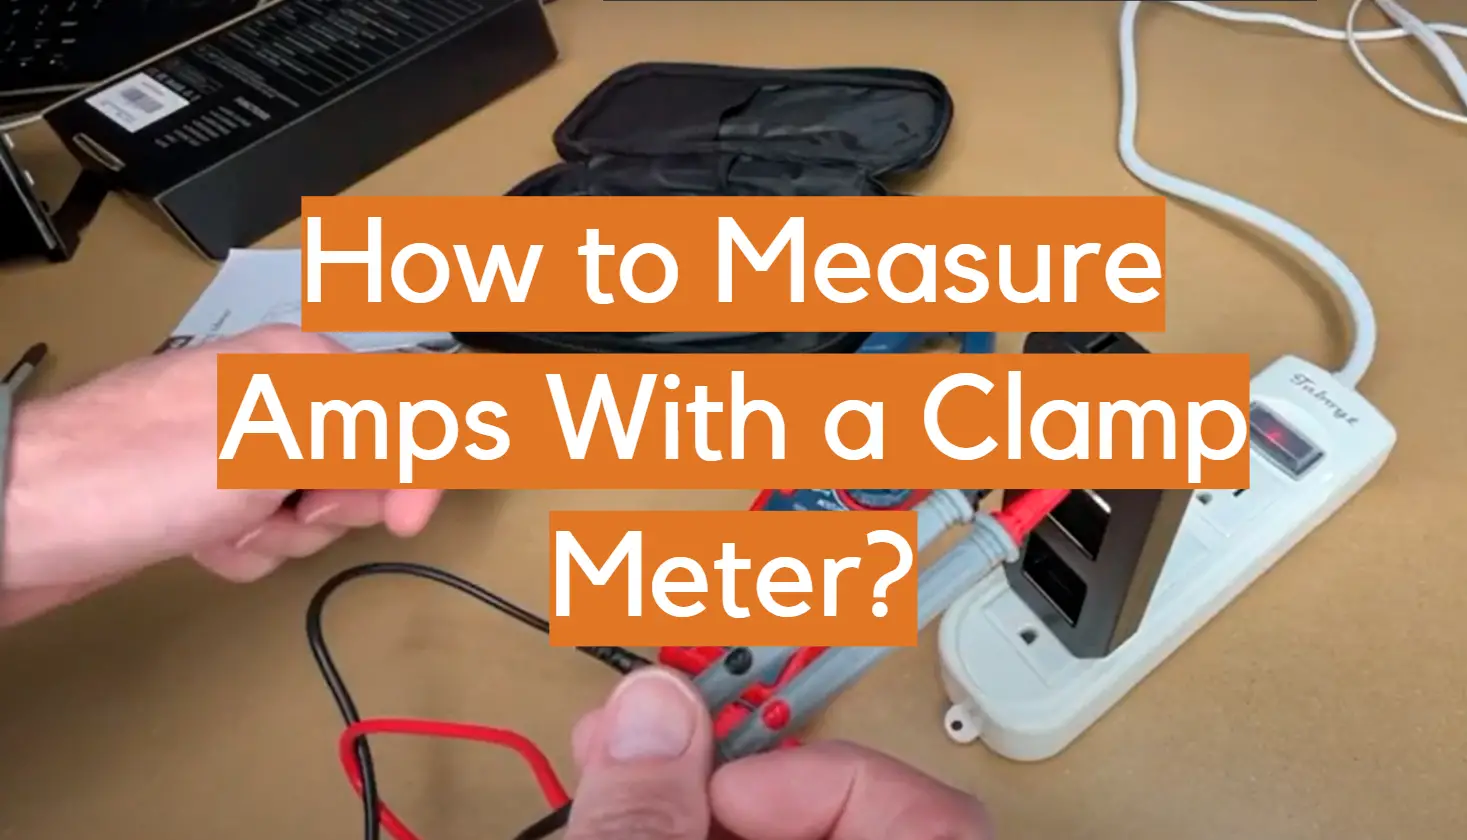 How to Measure Amps With a Clamp Meter?